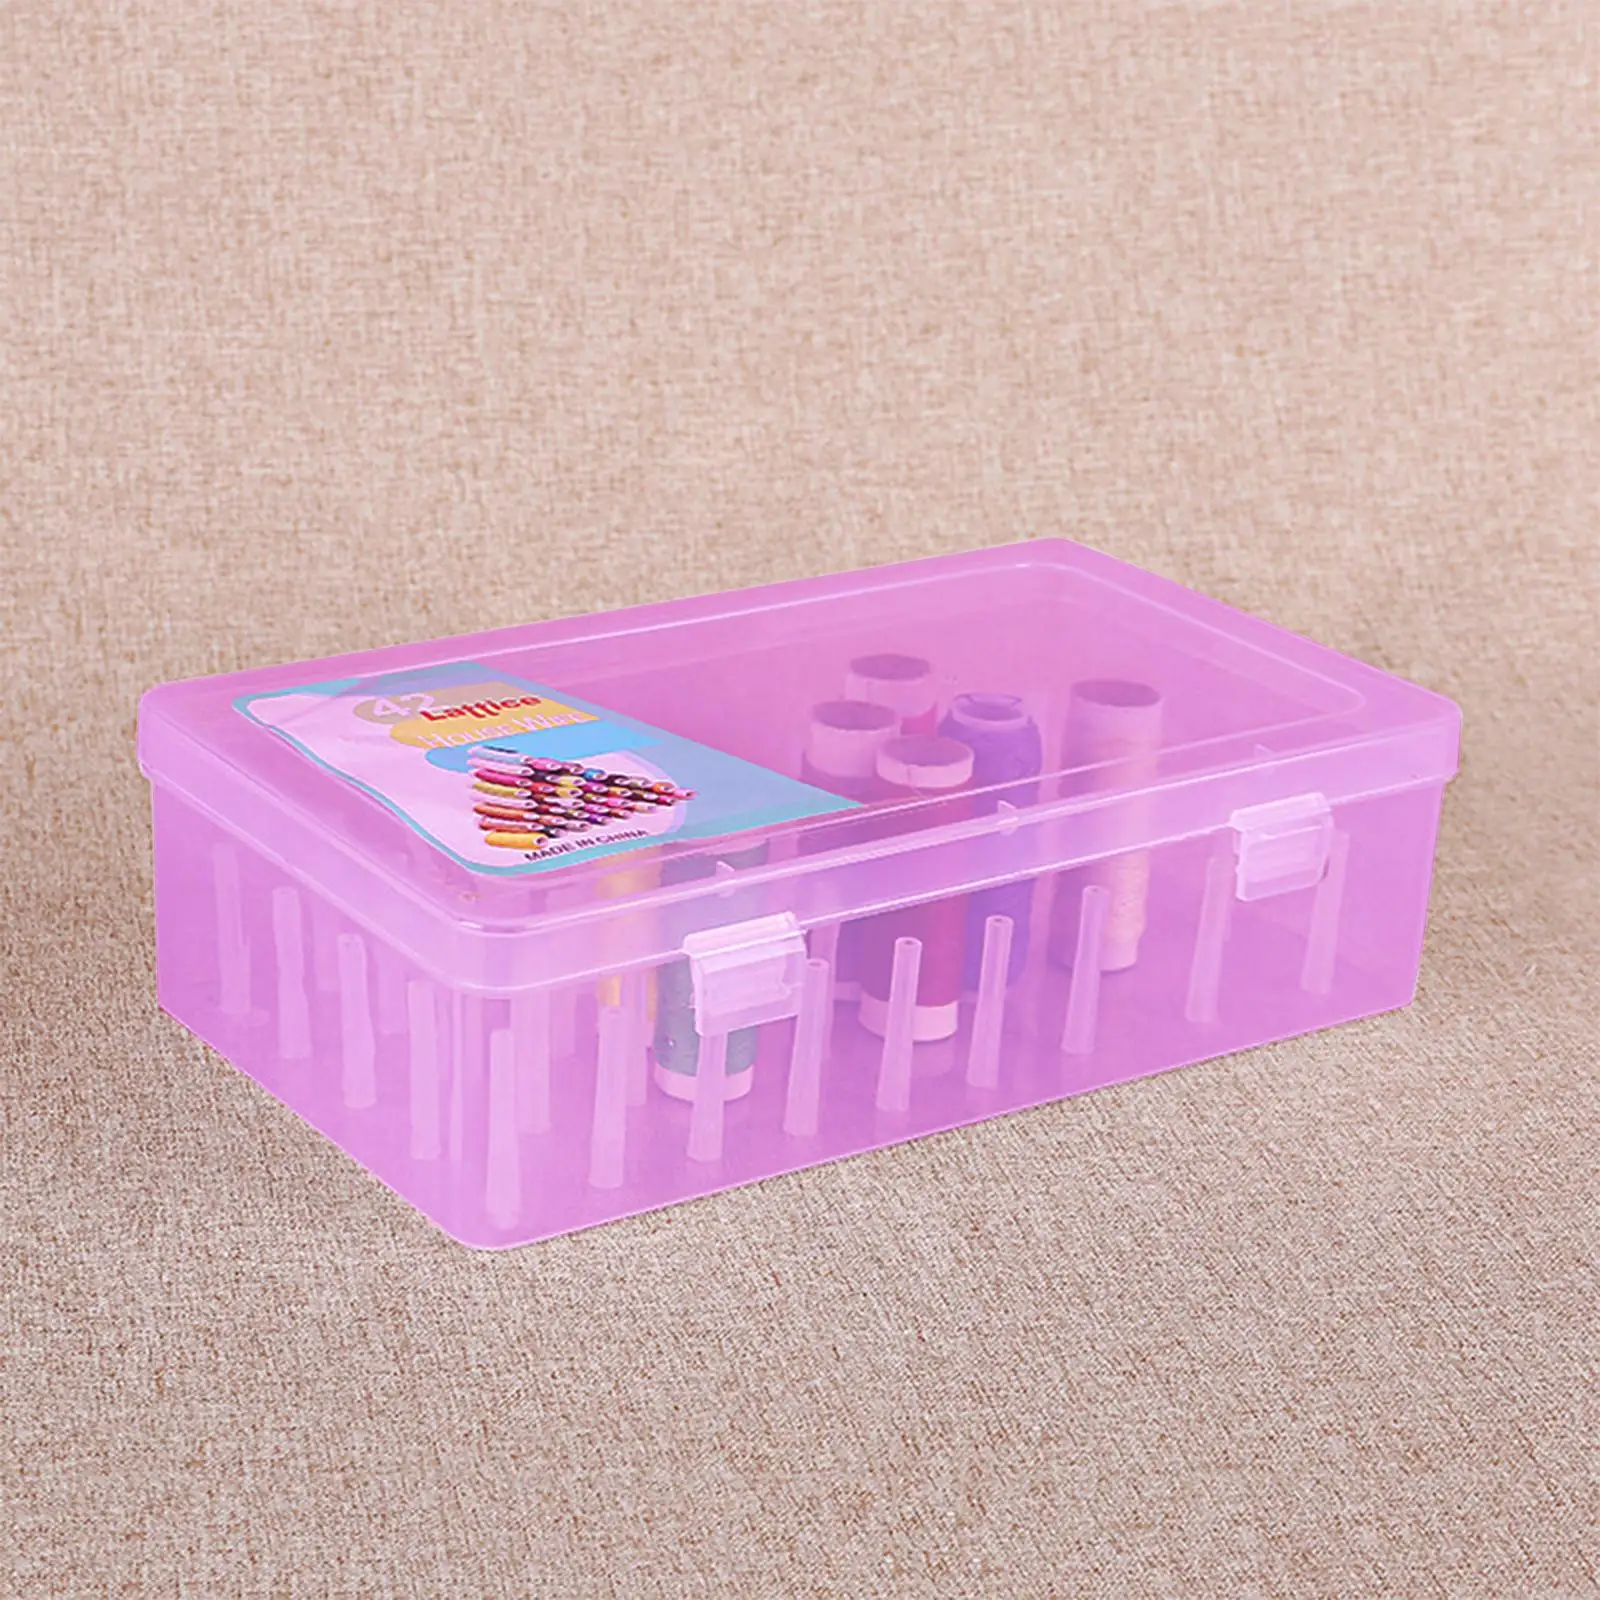 Sewing Thread Storage Box 42 Axis Container Holder Transparent Sewing Reel Case for Household Accessories Spools Sewing Bobbin